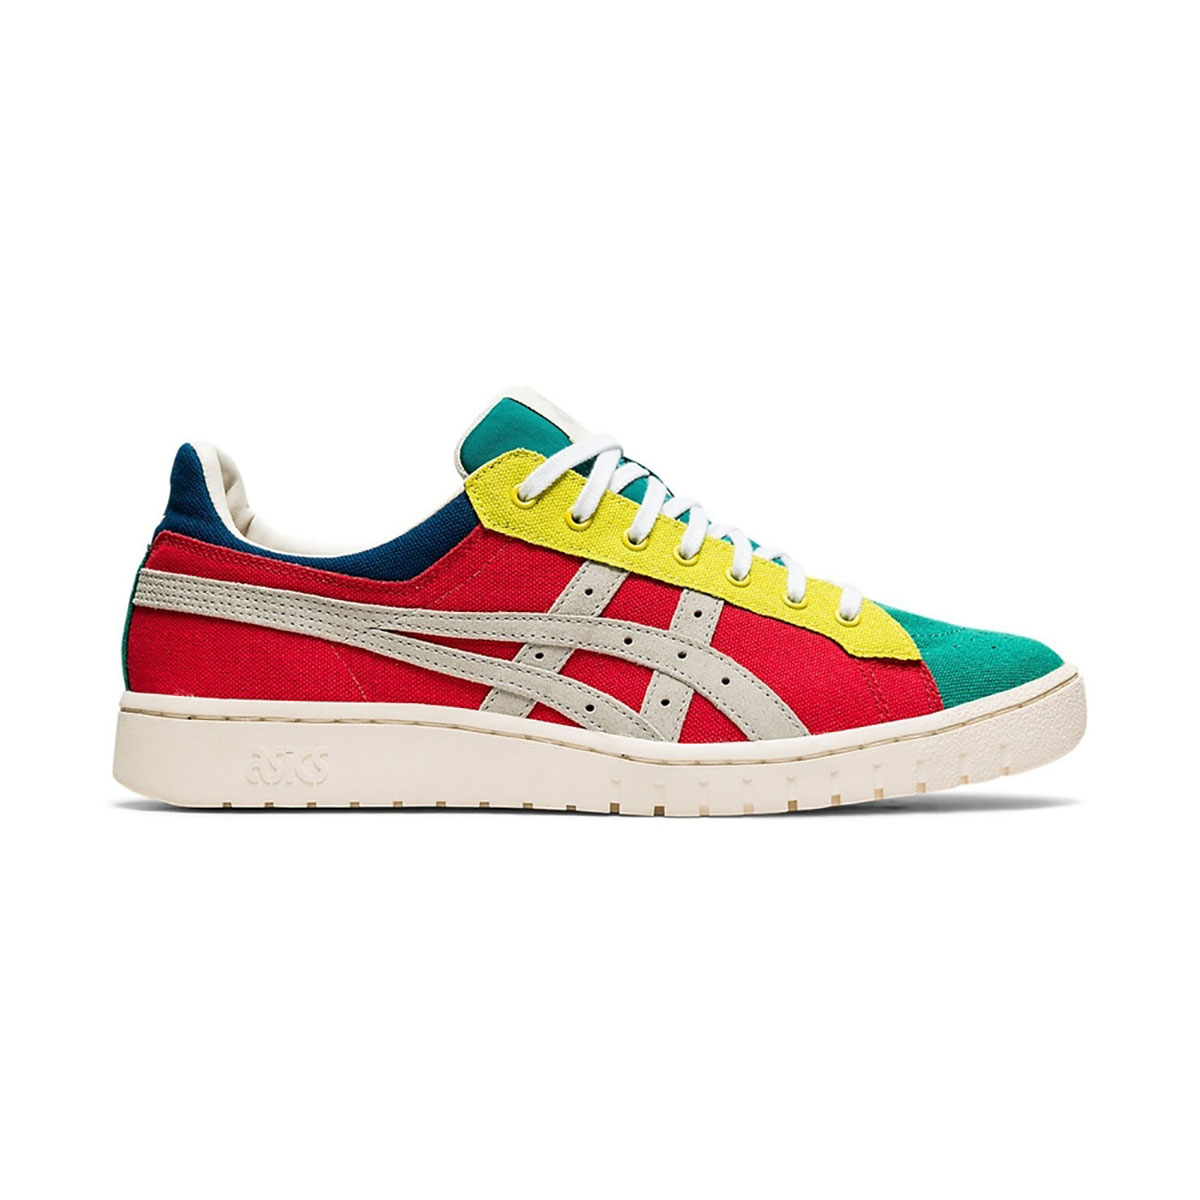 ASICS x Atmos Unisex Gel-PTG Multicolor Sneakers 1193A202.000